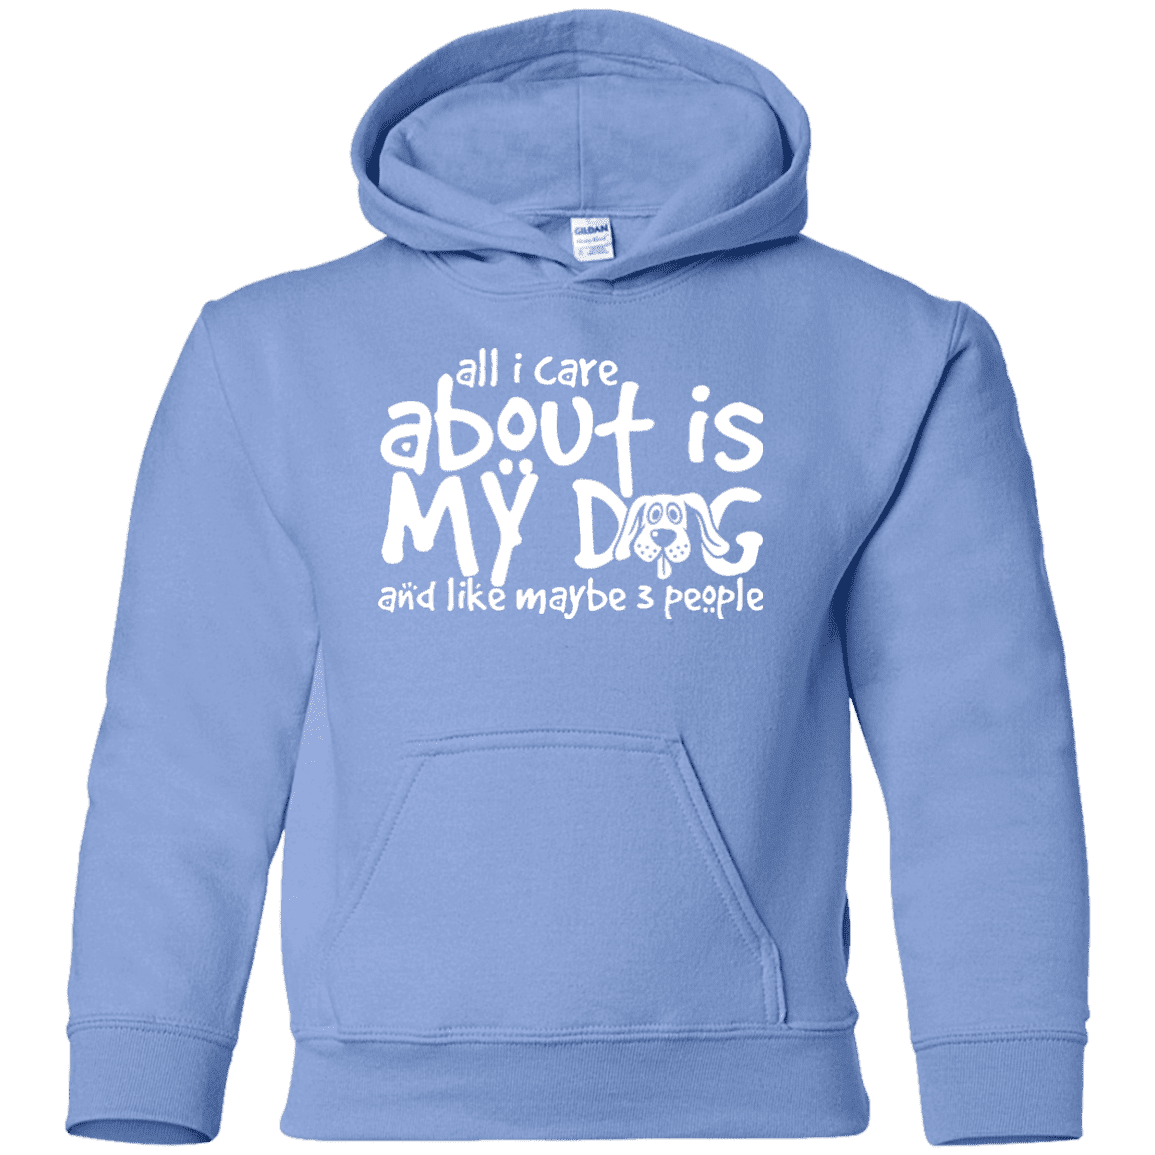 All I Care About Is My Dog - Youth Hoodie.